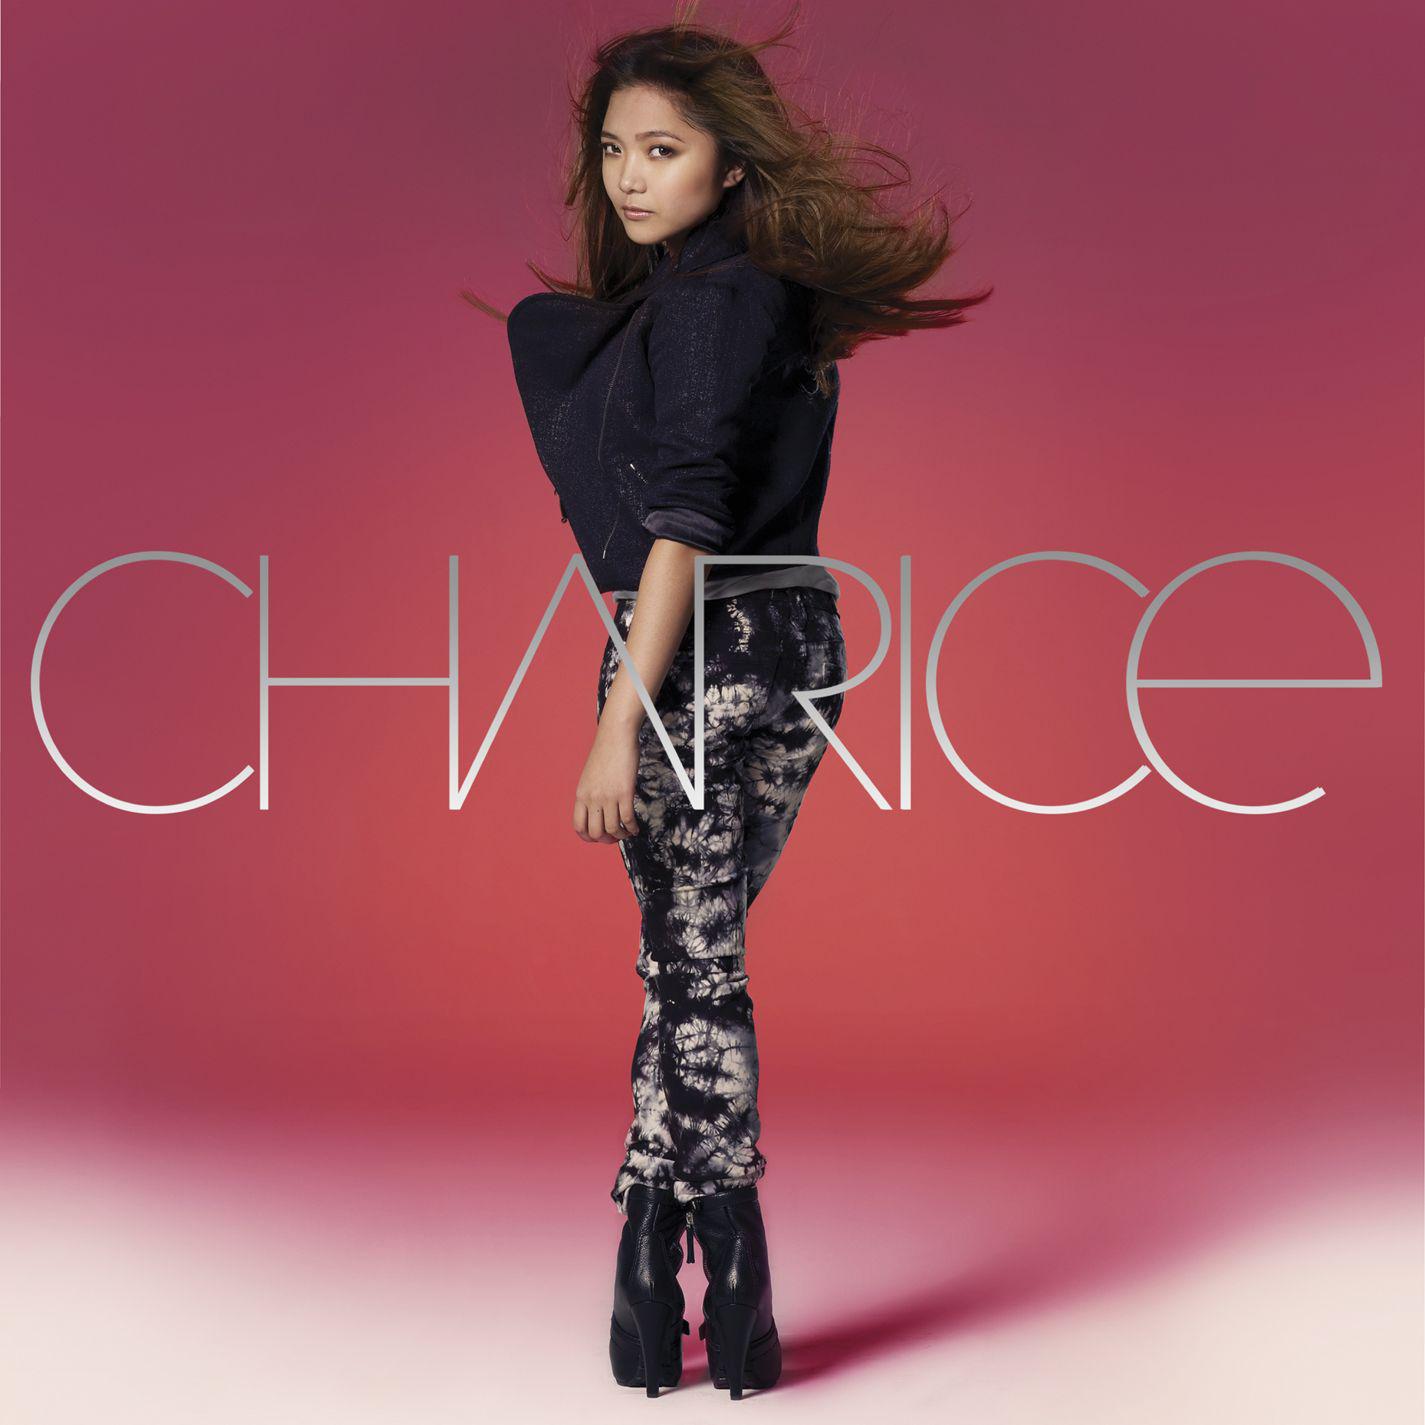 Charice - Thank You